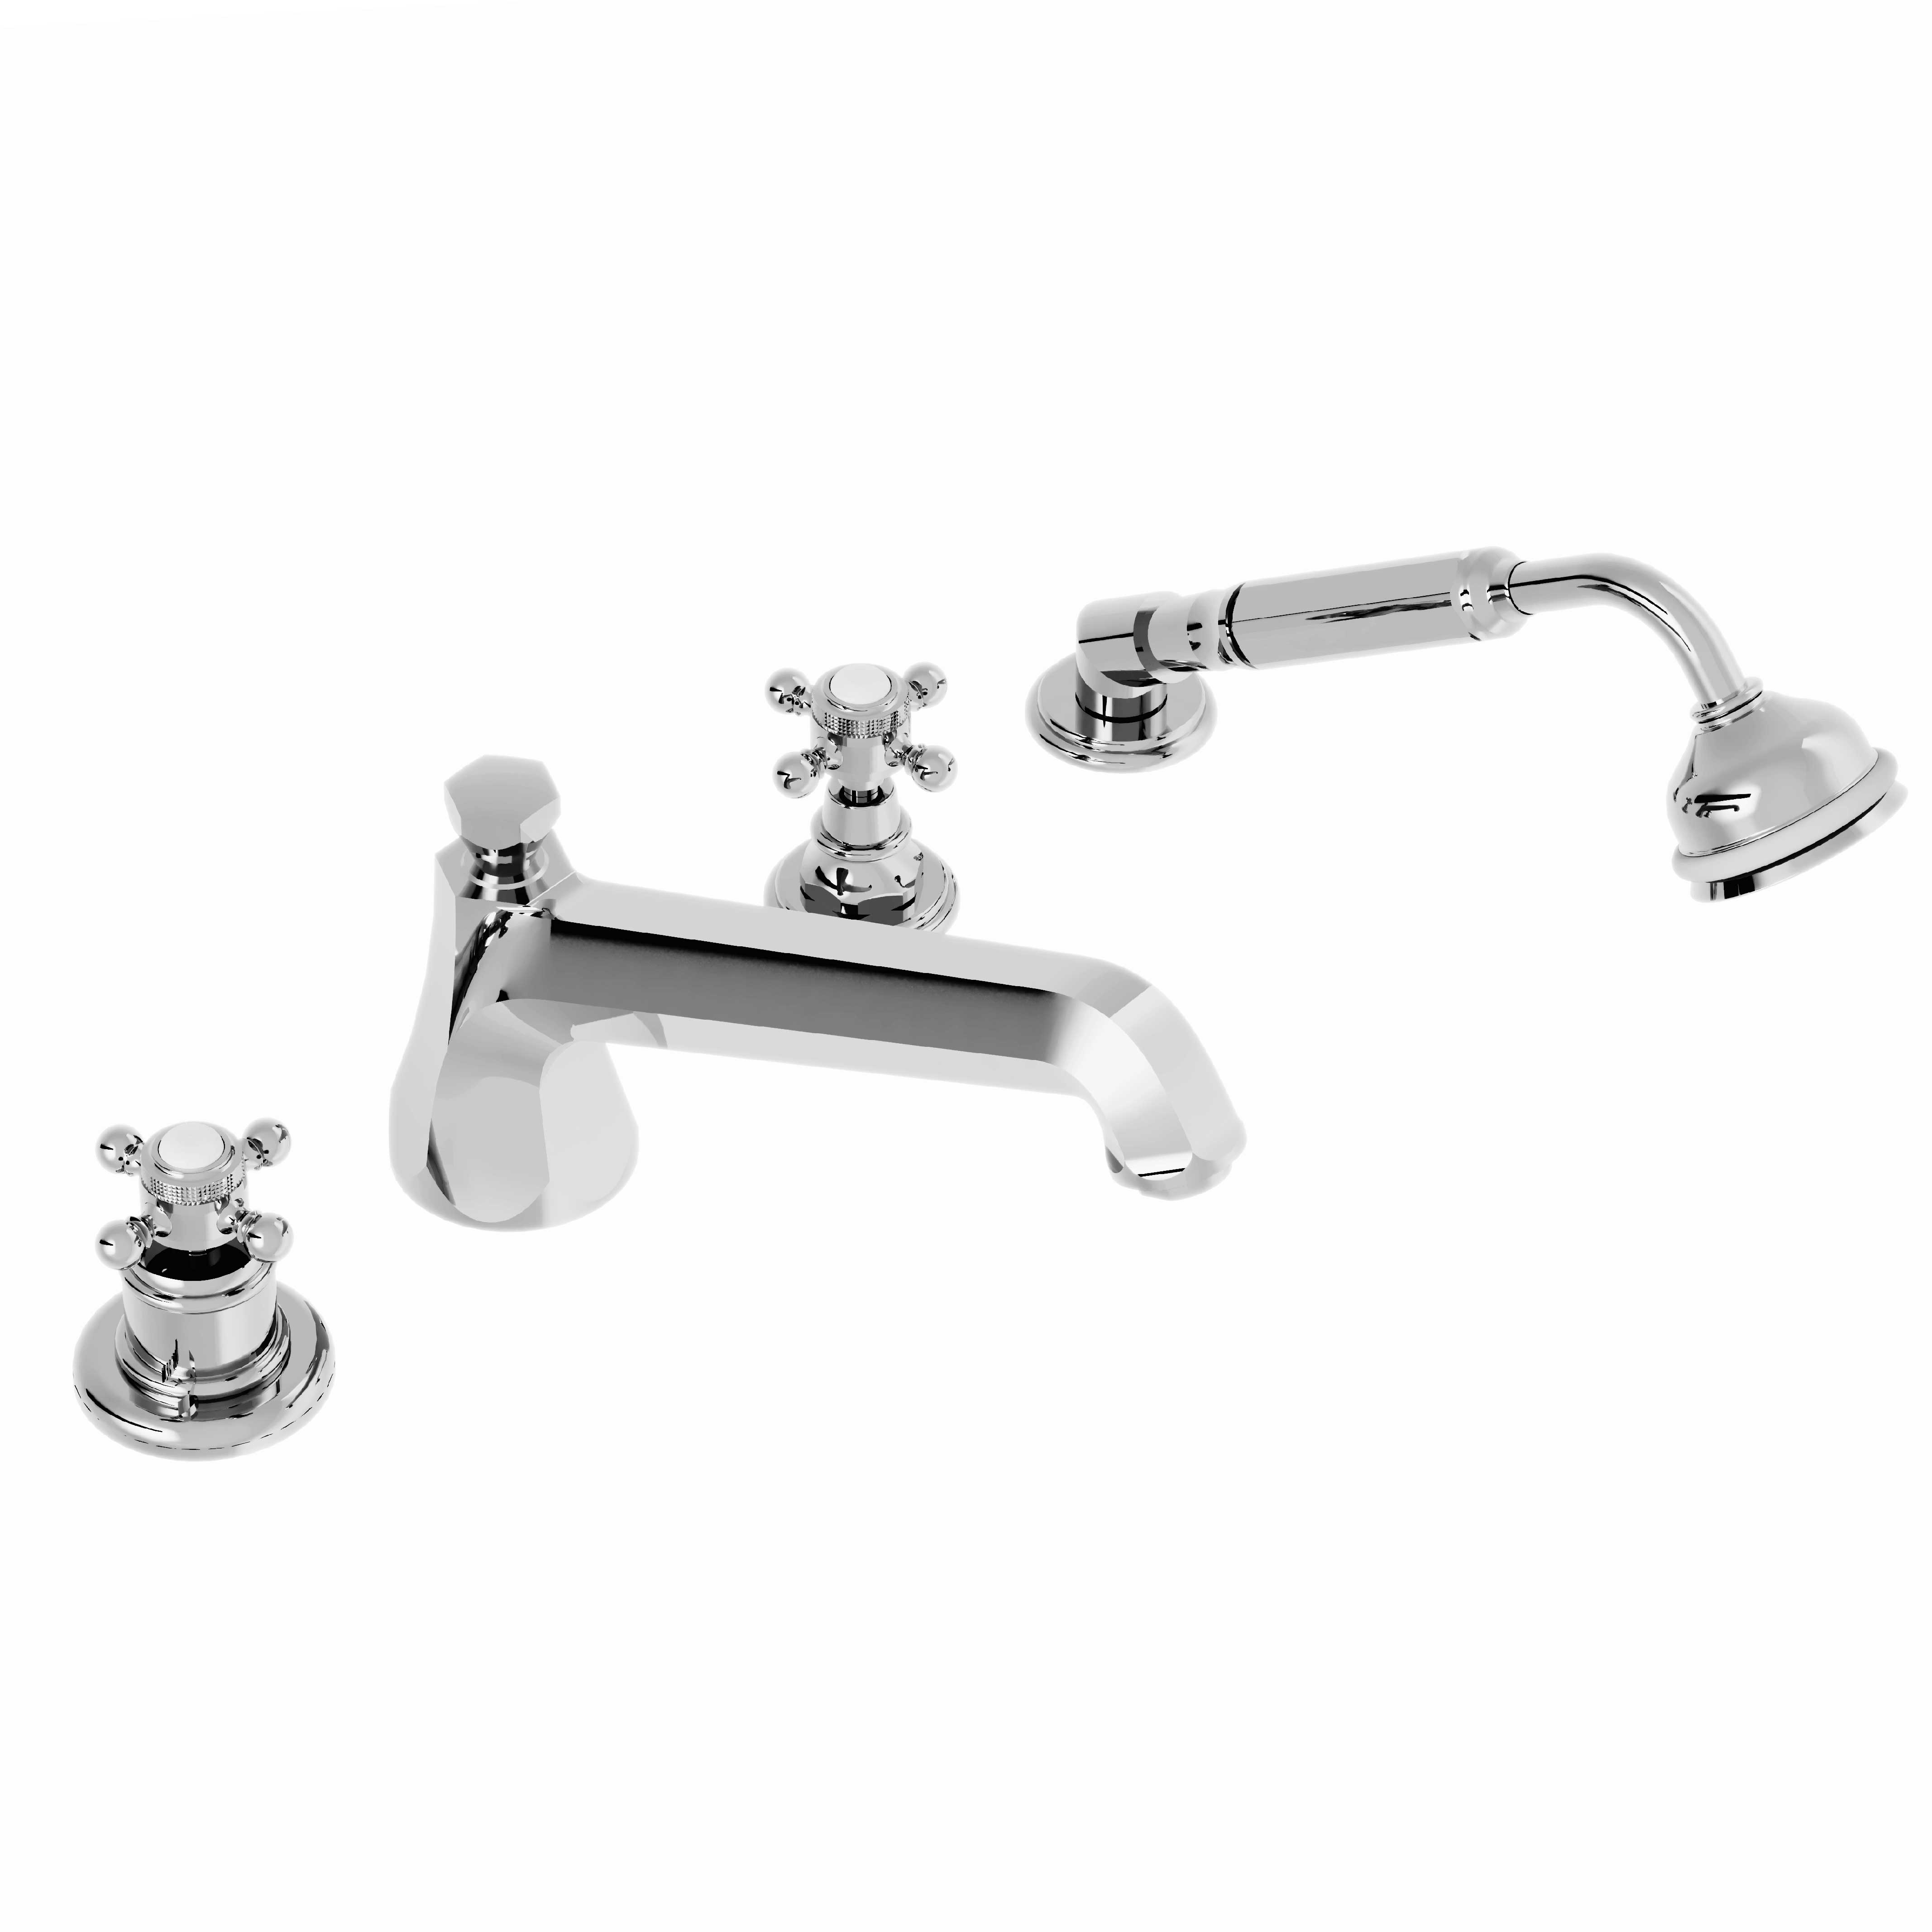 M30-3304TXL XL 4-hole bath and shower thermo. mixer